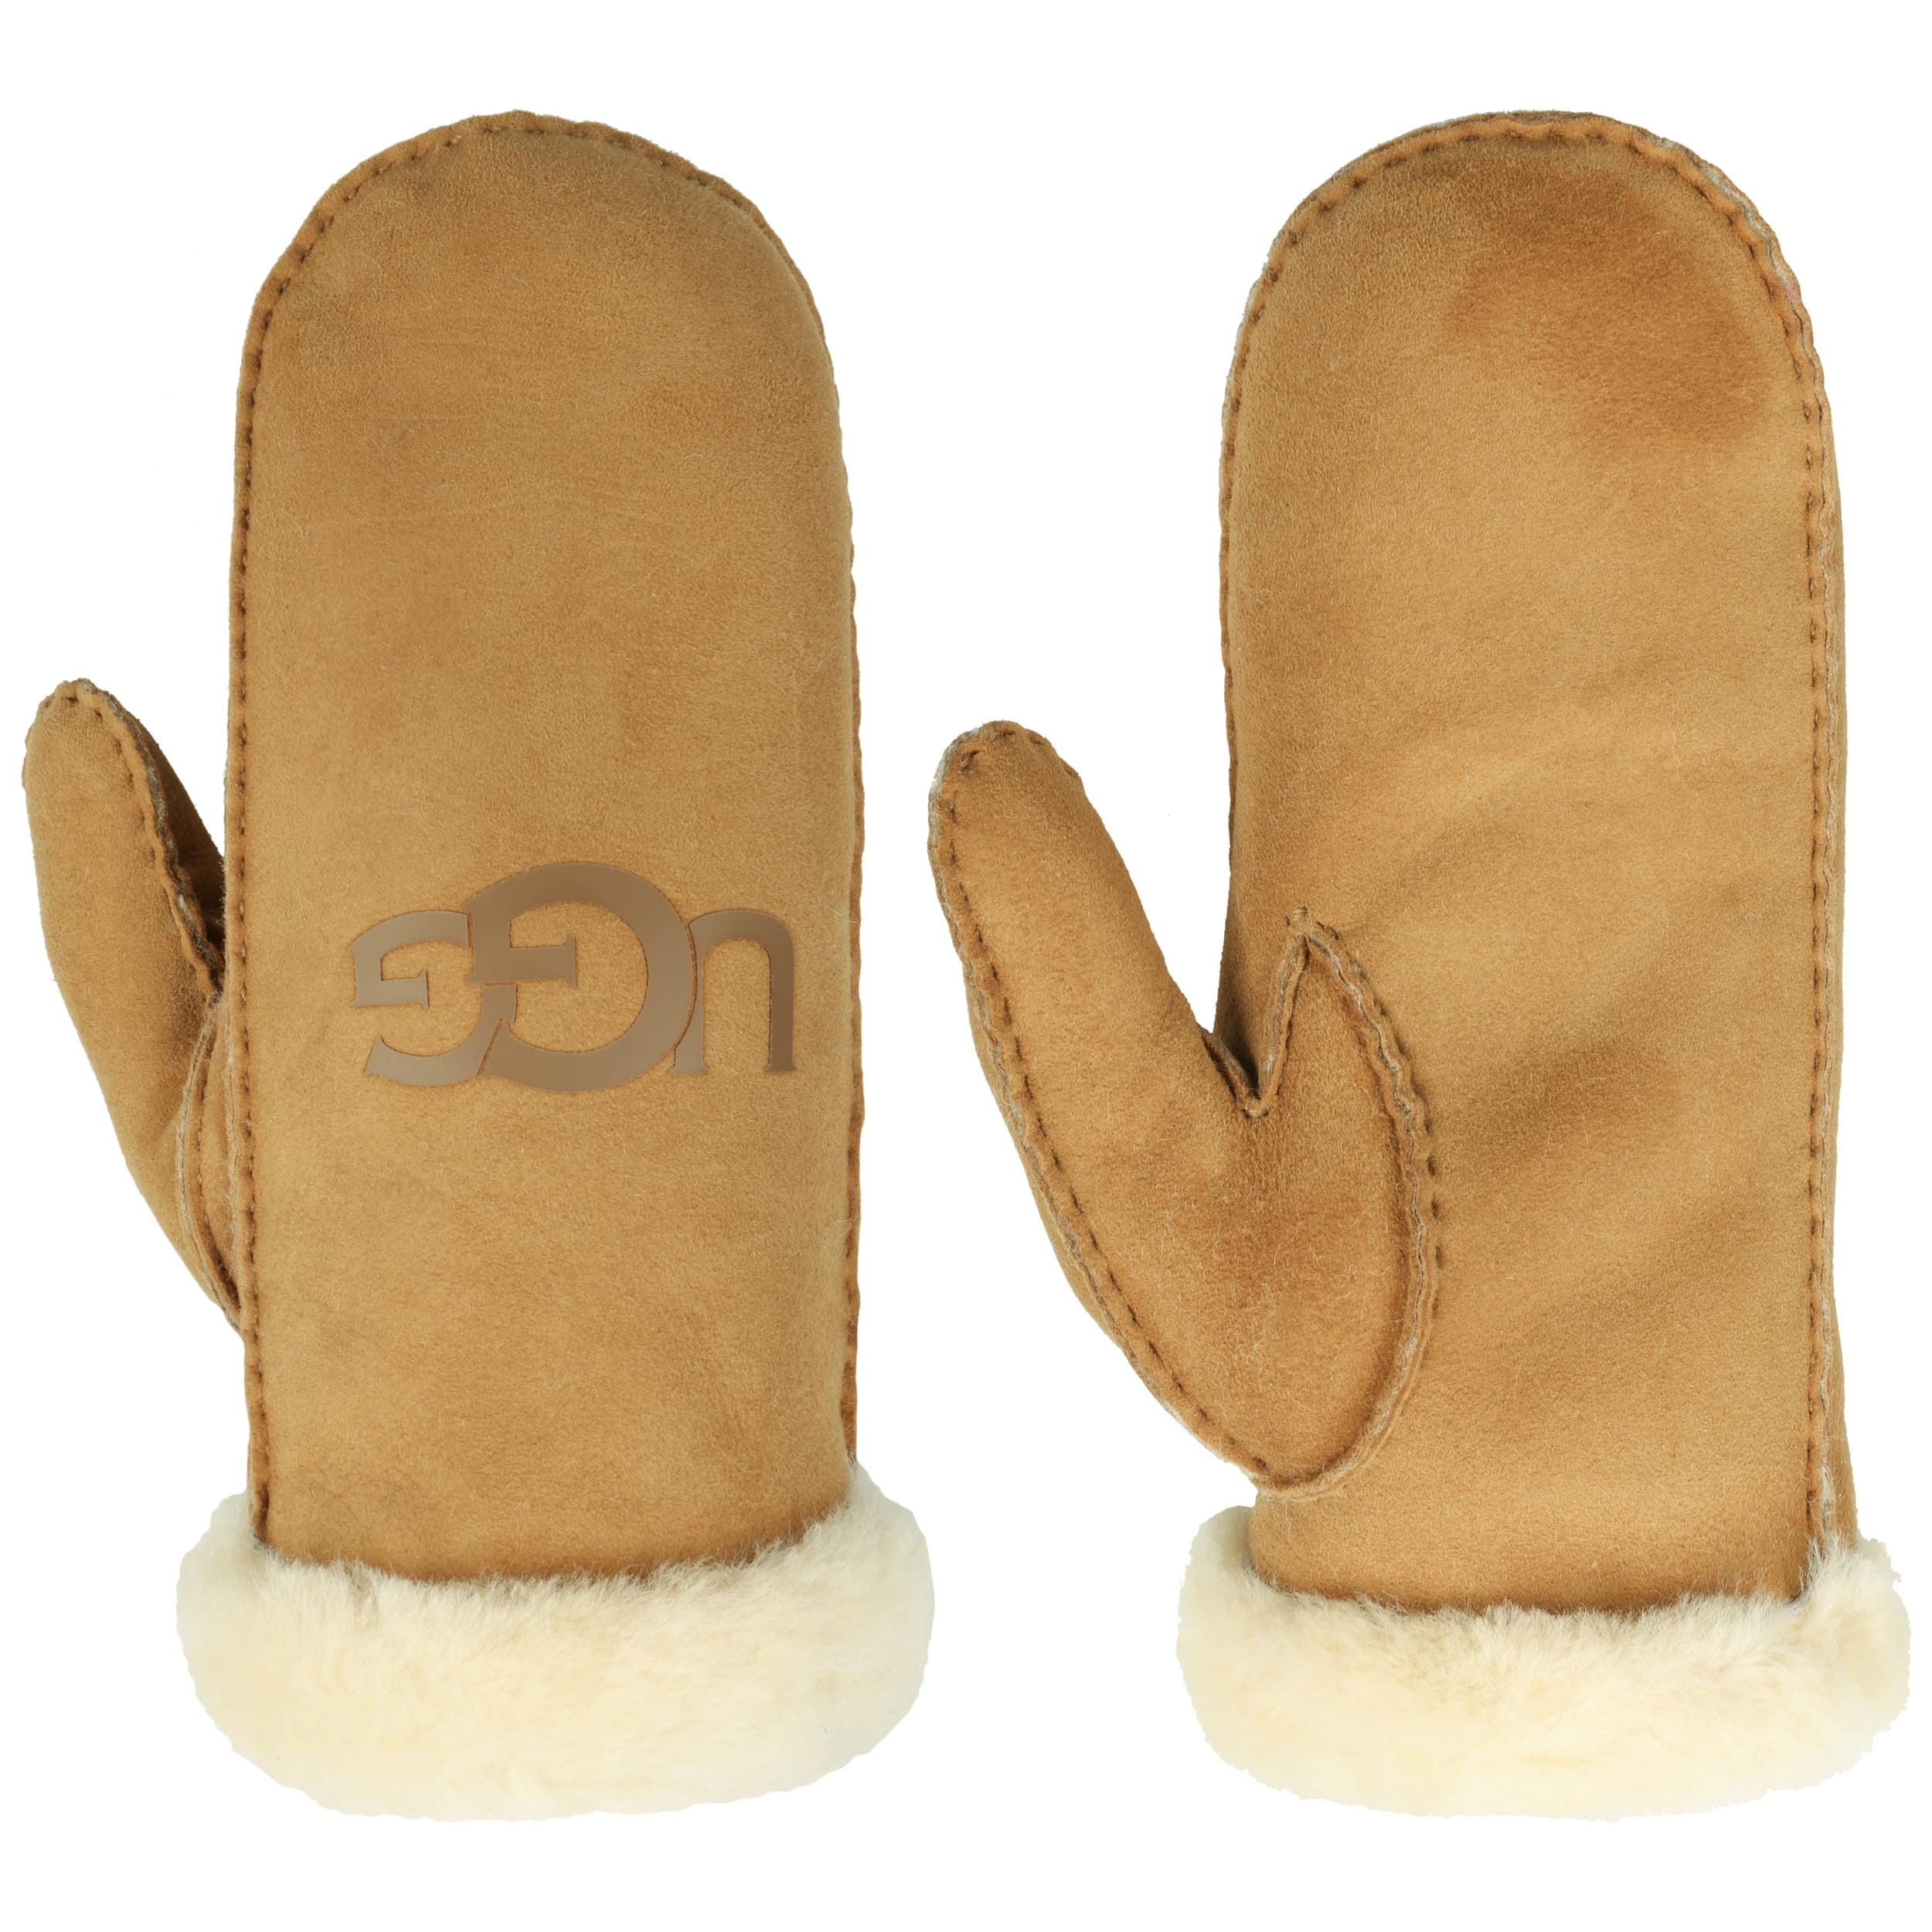 uggs mittens on sale